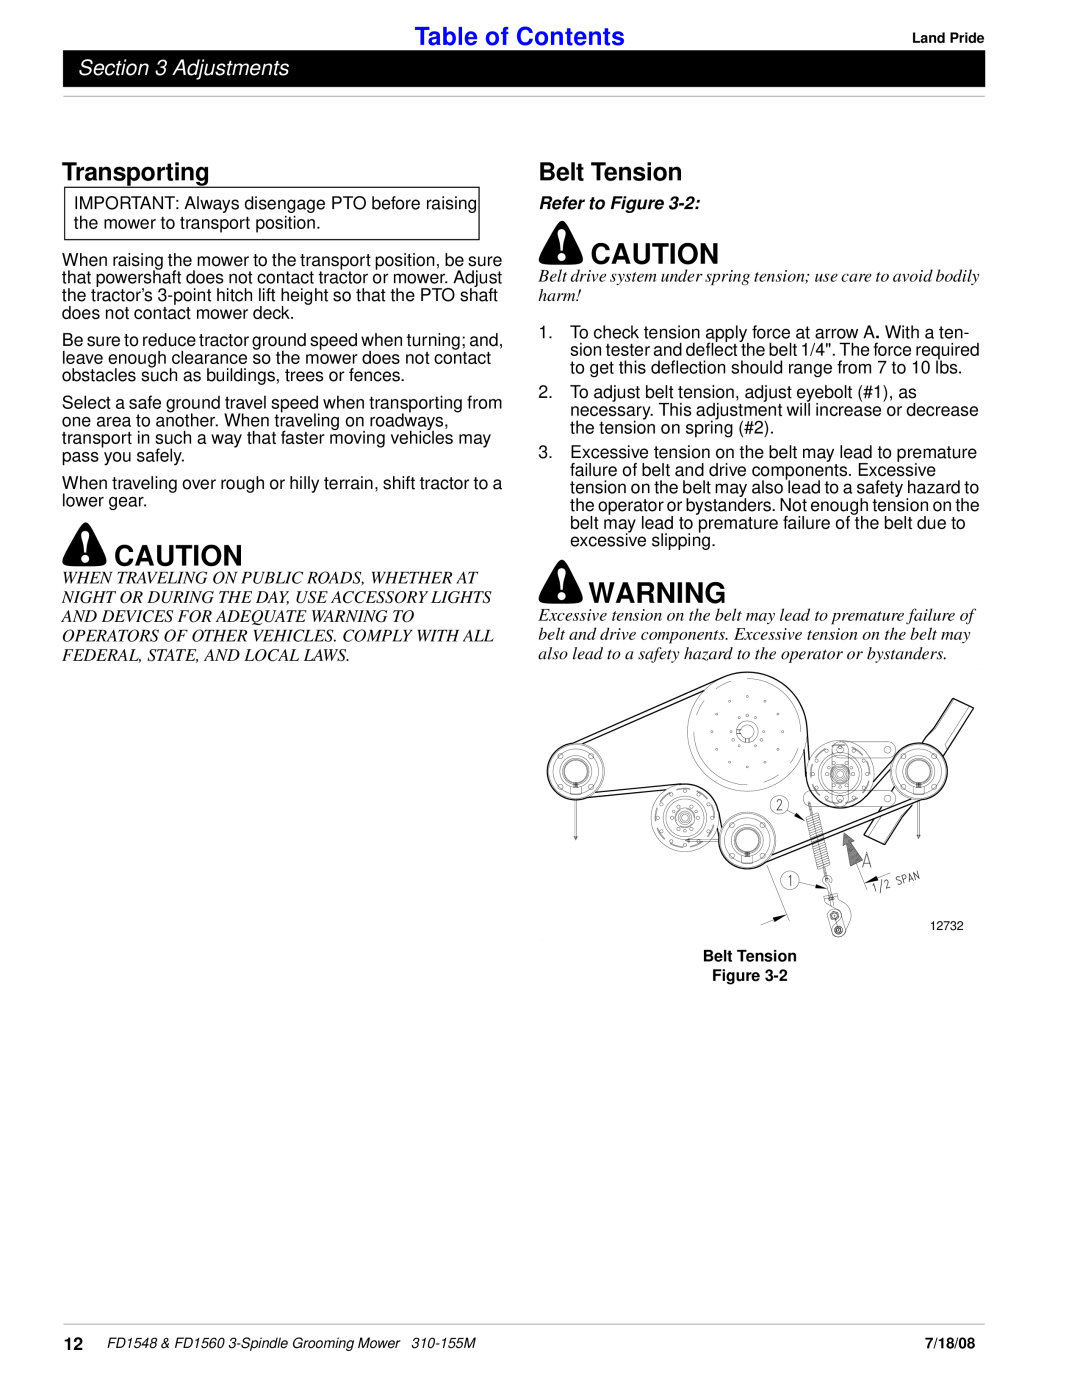 Land Pride fd1548 manual Belt Tension, Table of Contents, Transporting, Adjustments, Refer to Figure 